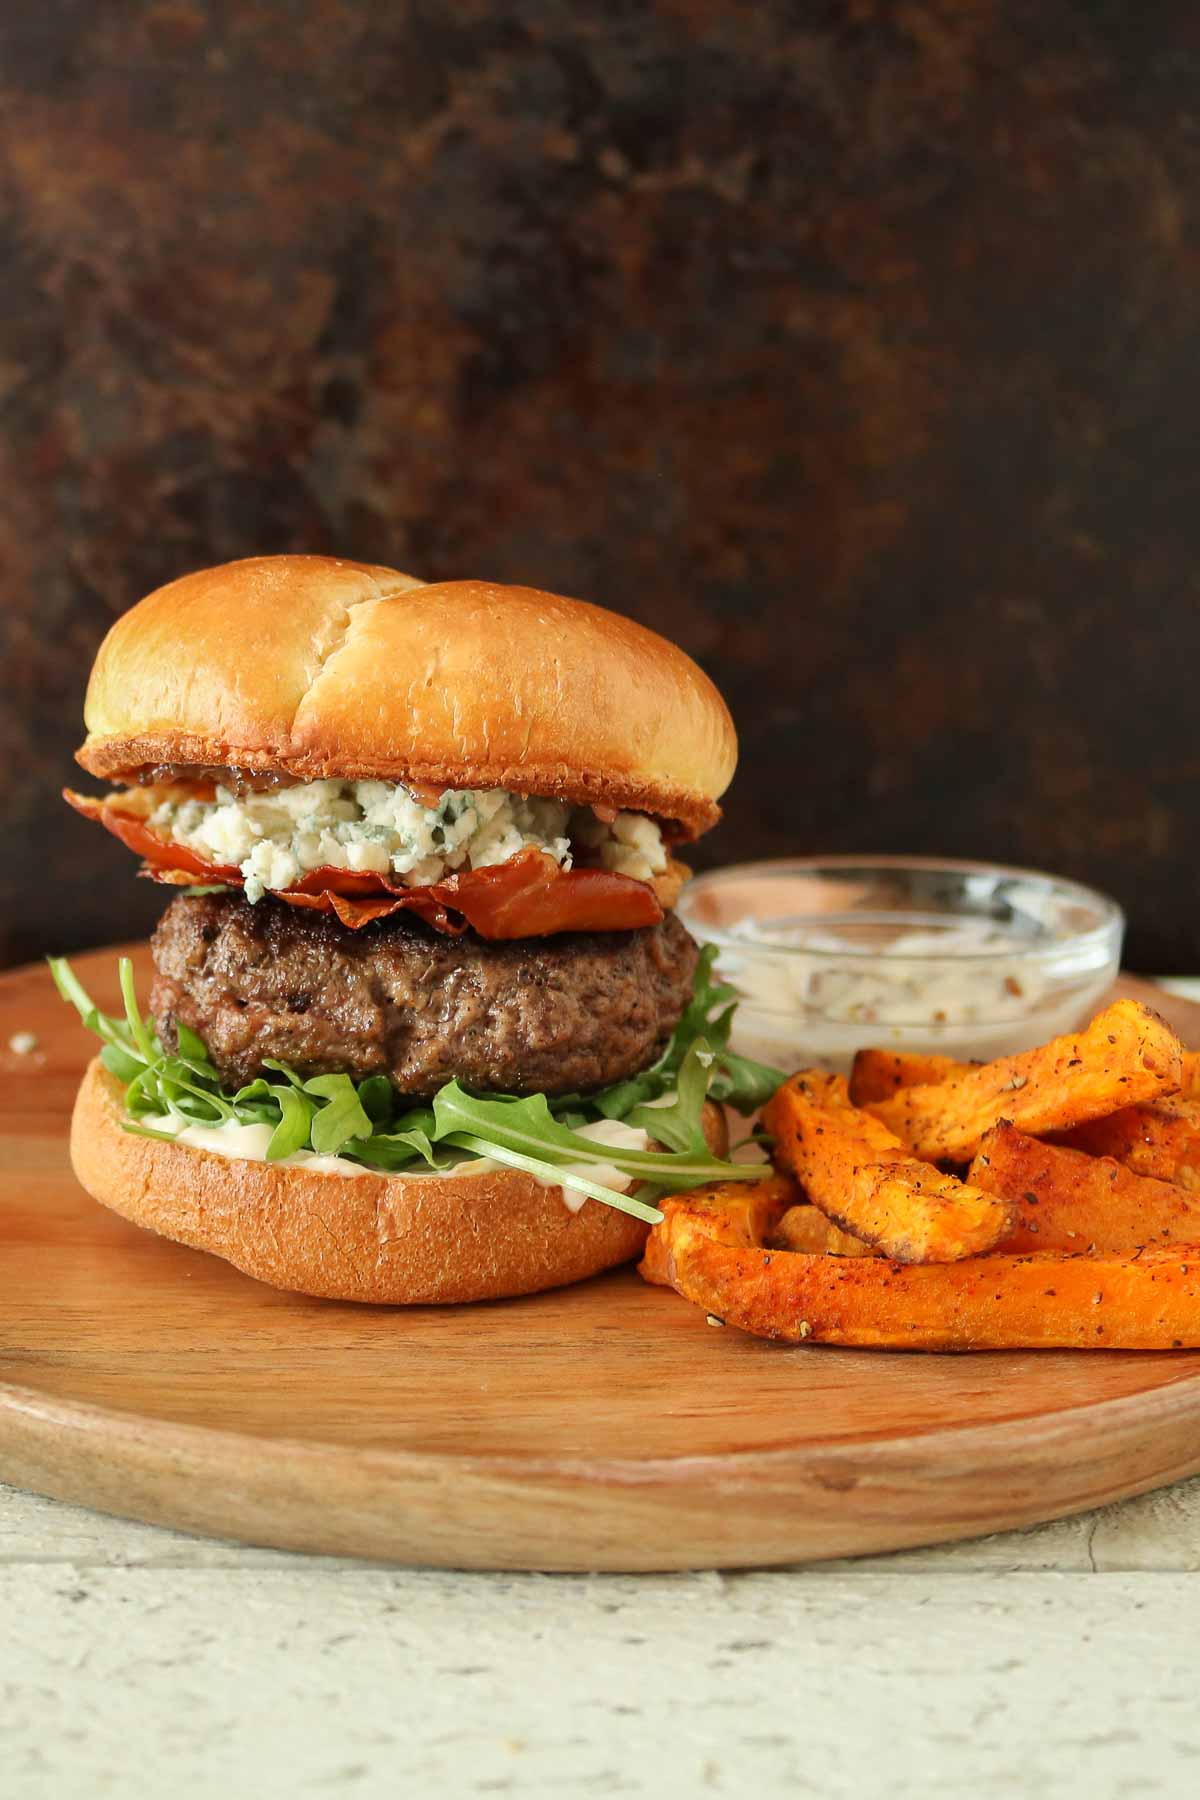 Prosciutto and blue cheese burger, sweet potato fries and dipping sauce on a wooden plate.